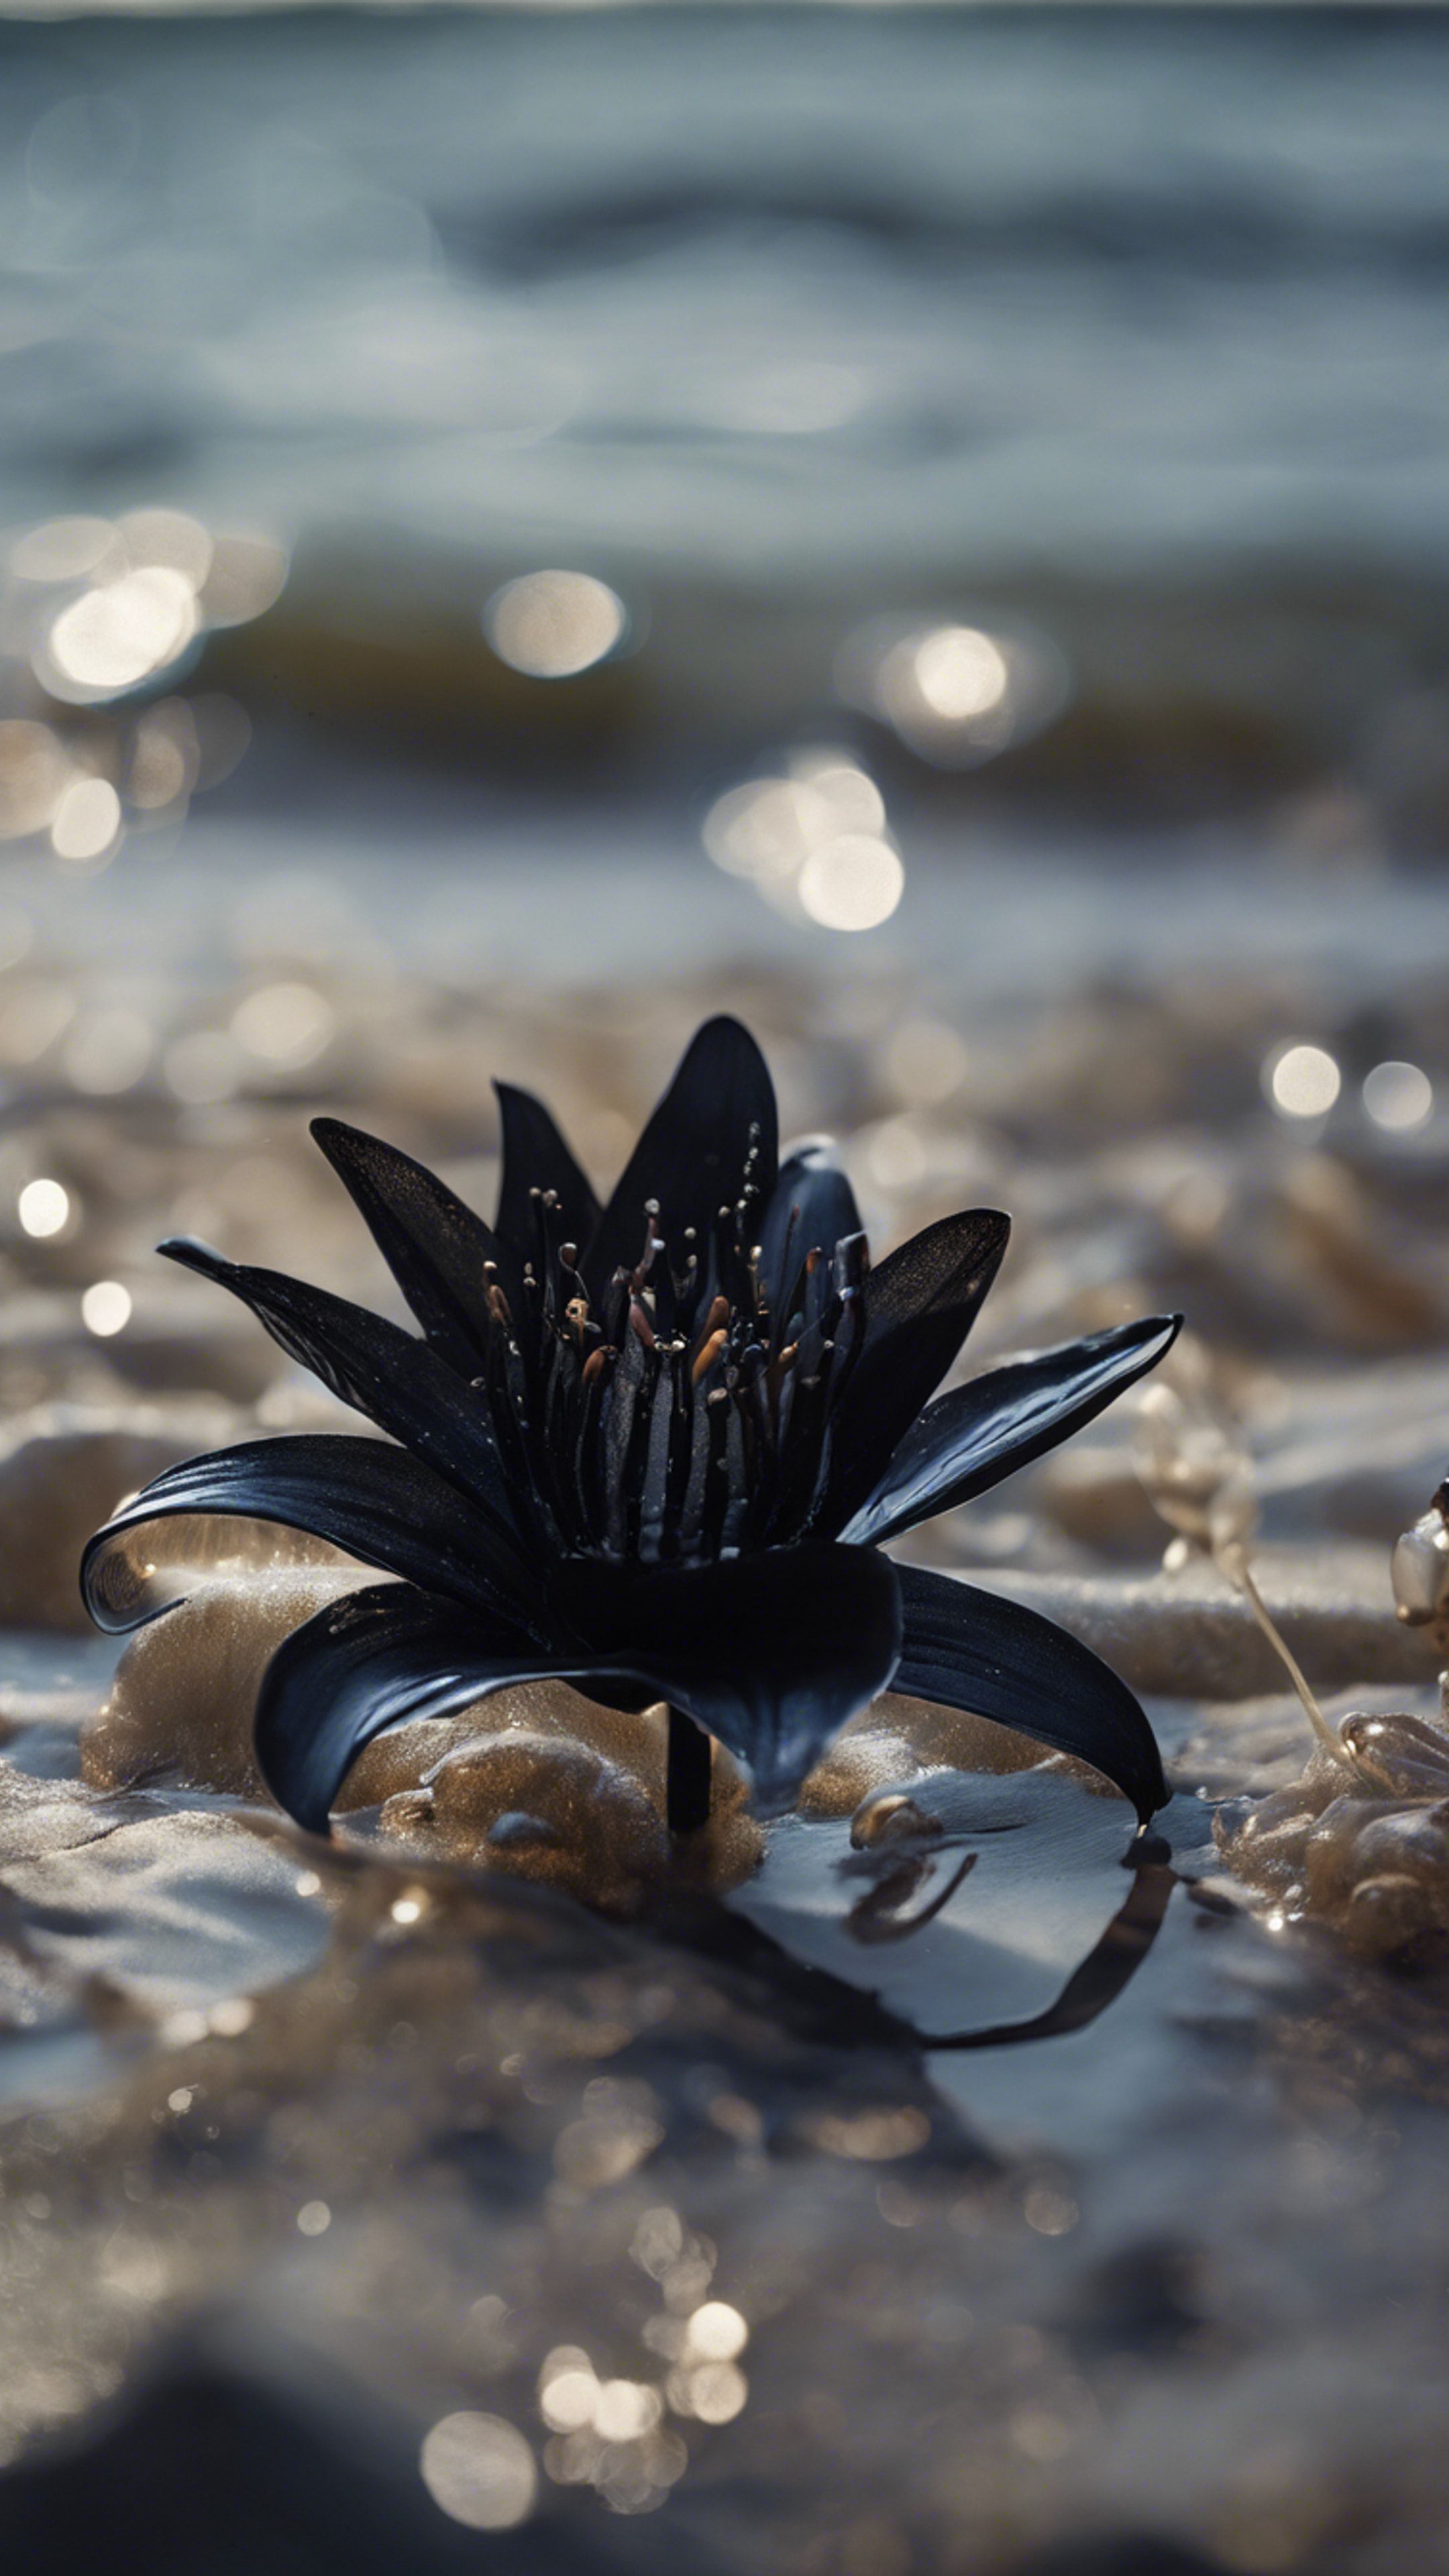 A black lily hiding under the tide, revealed only when the ocean pulls away, revealing the dark secrets of the sea bed. Tapet[3833c30c18c941348380]